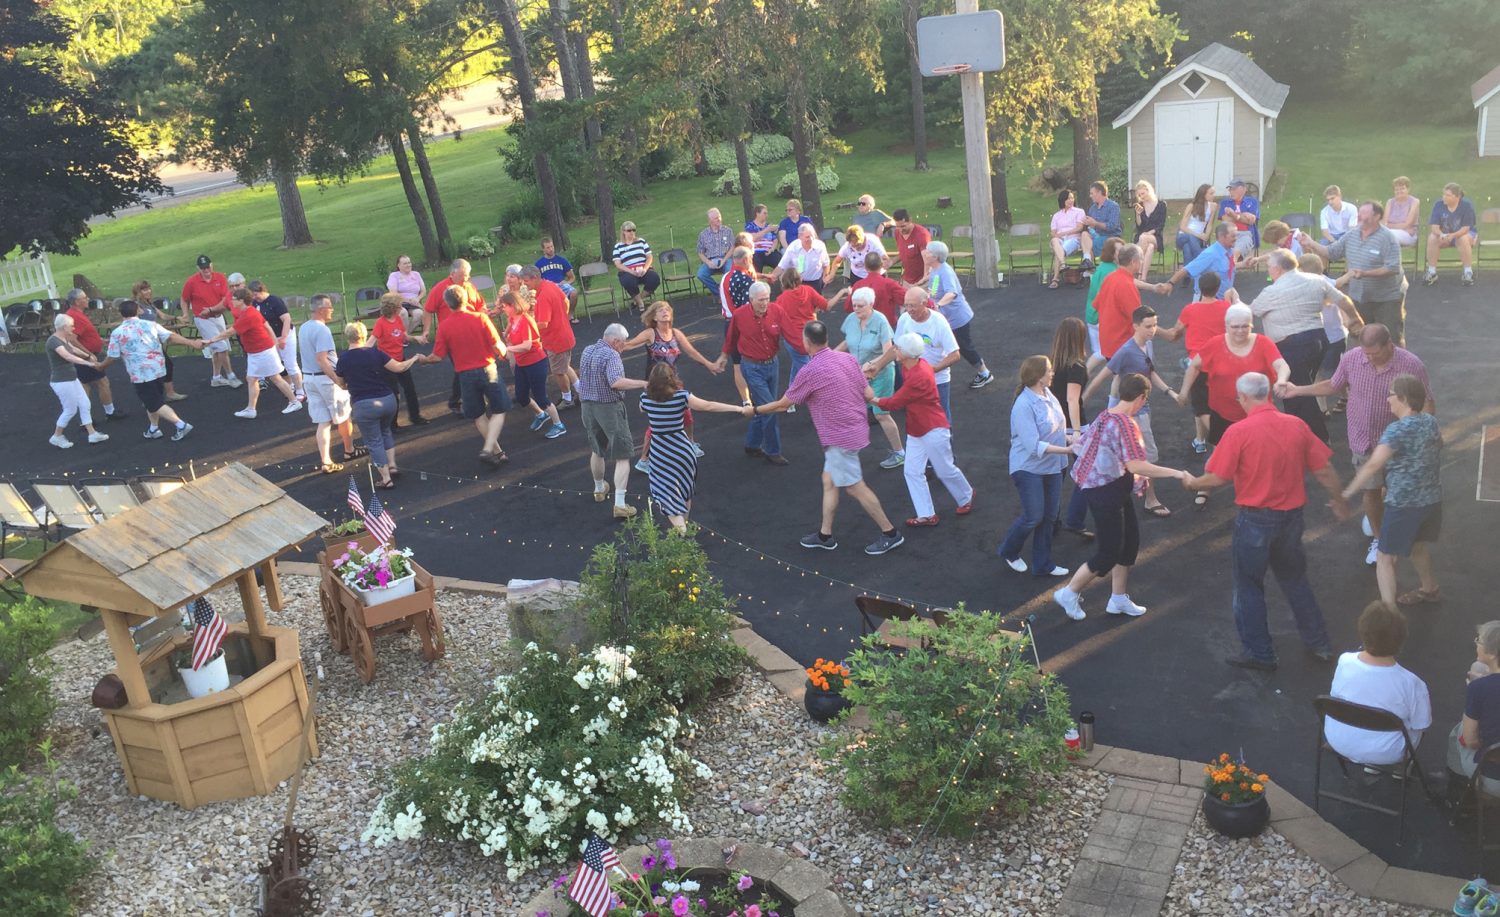 Pictured is the Marshfield HoeDowners' 2016 Club Picnic/Driveway Dance hosted by Terry and Cindy Prust.